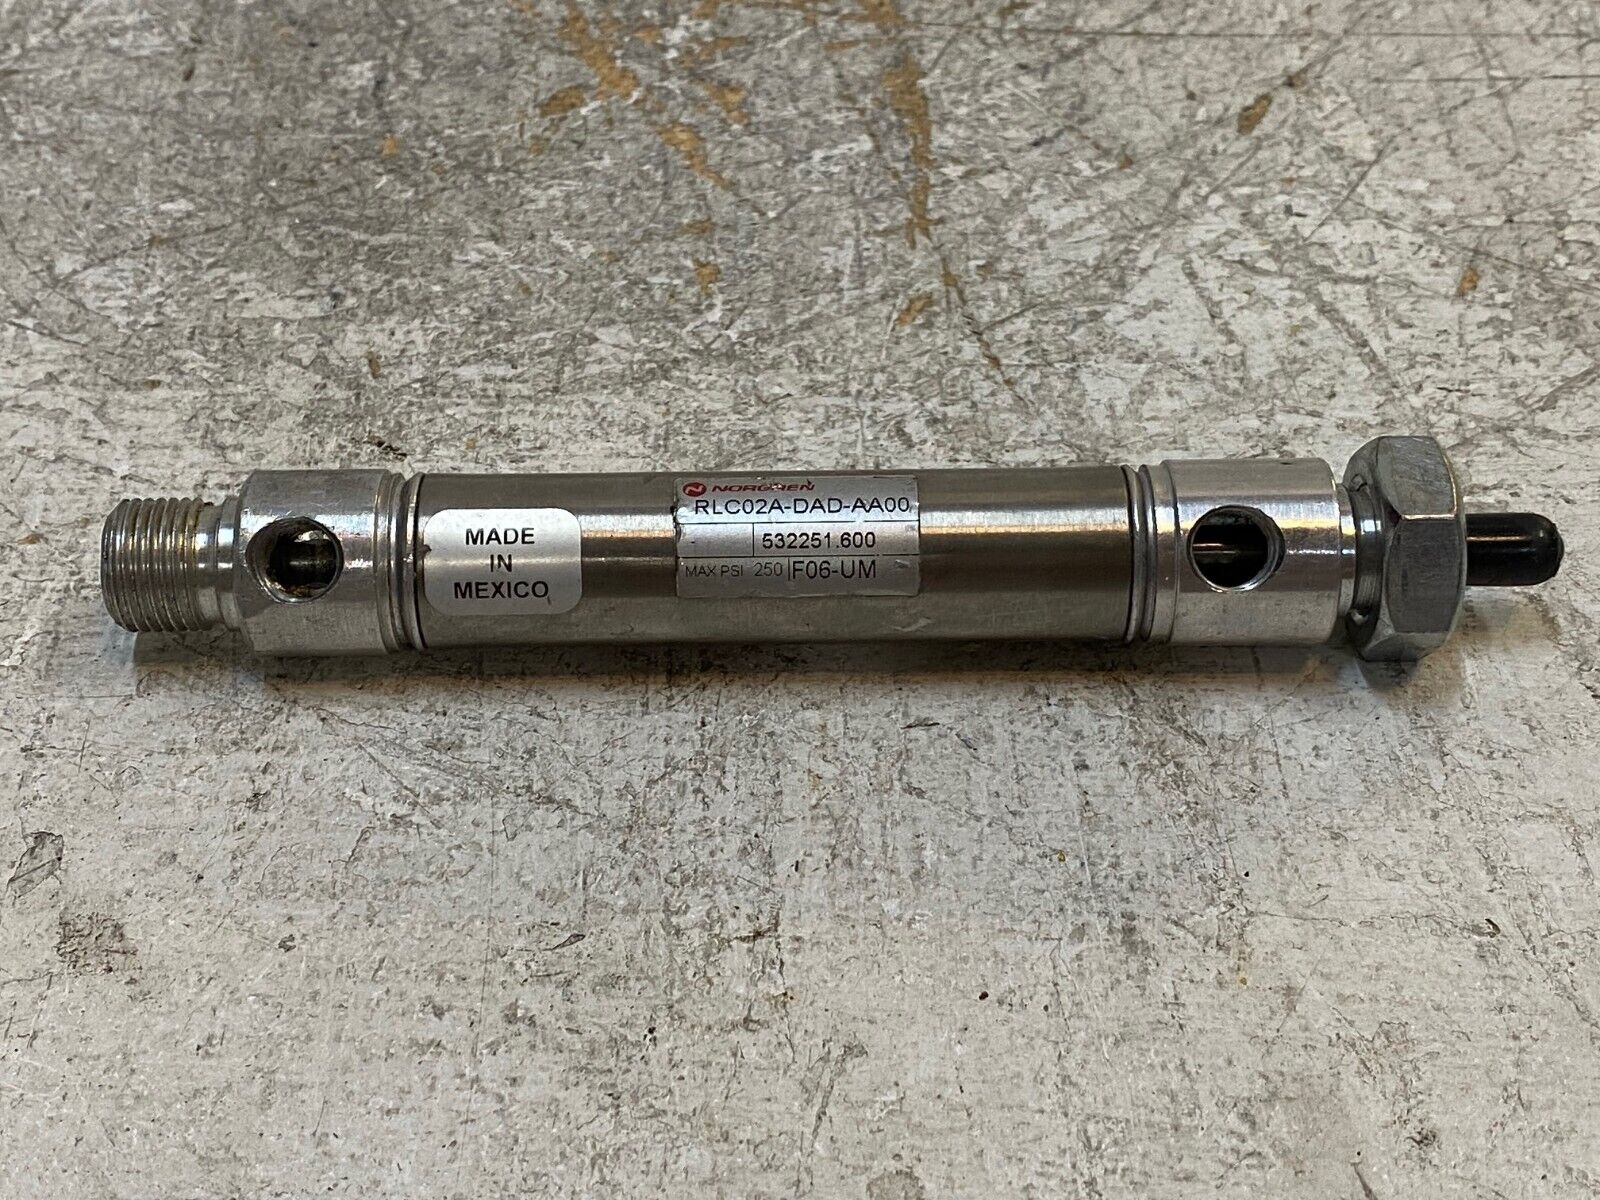 Primary image for Norgren RLC02A-DAD-AA00 Double Acting Pneumatic Cylinder 532251.600 F06-UM